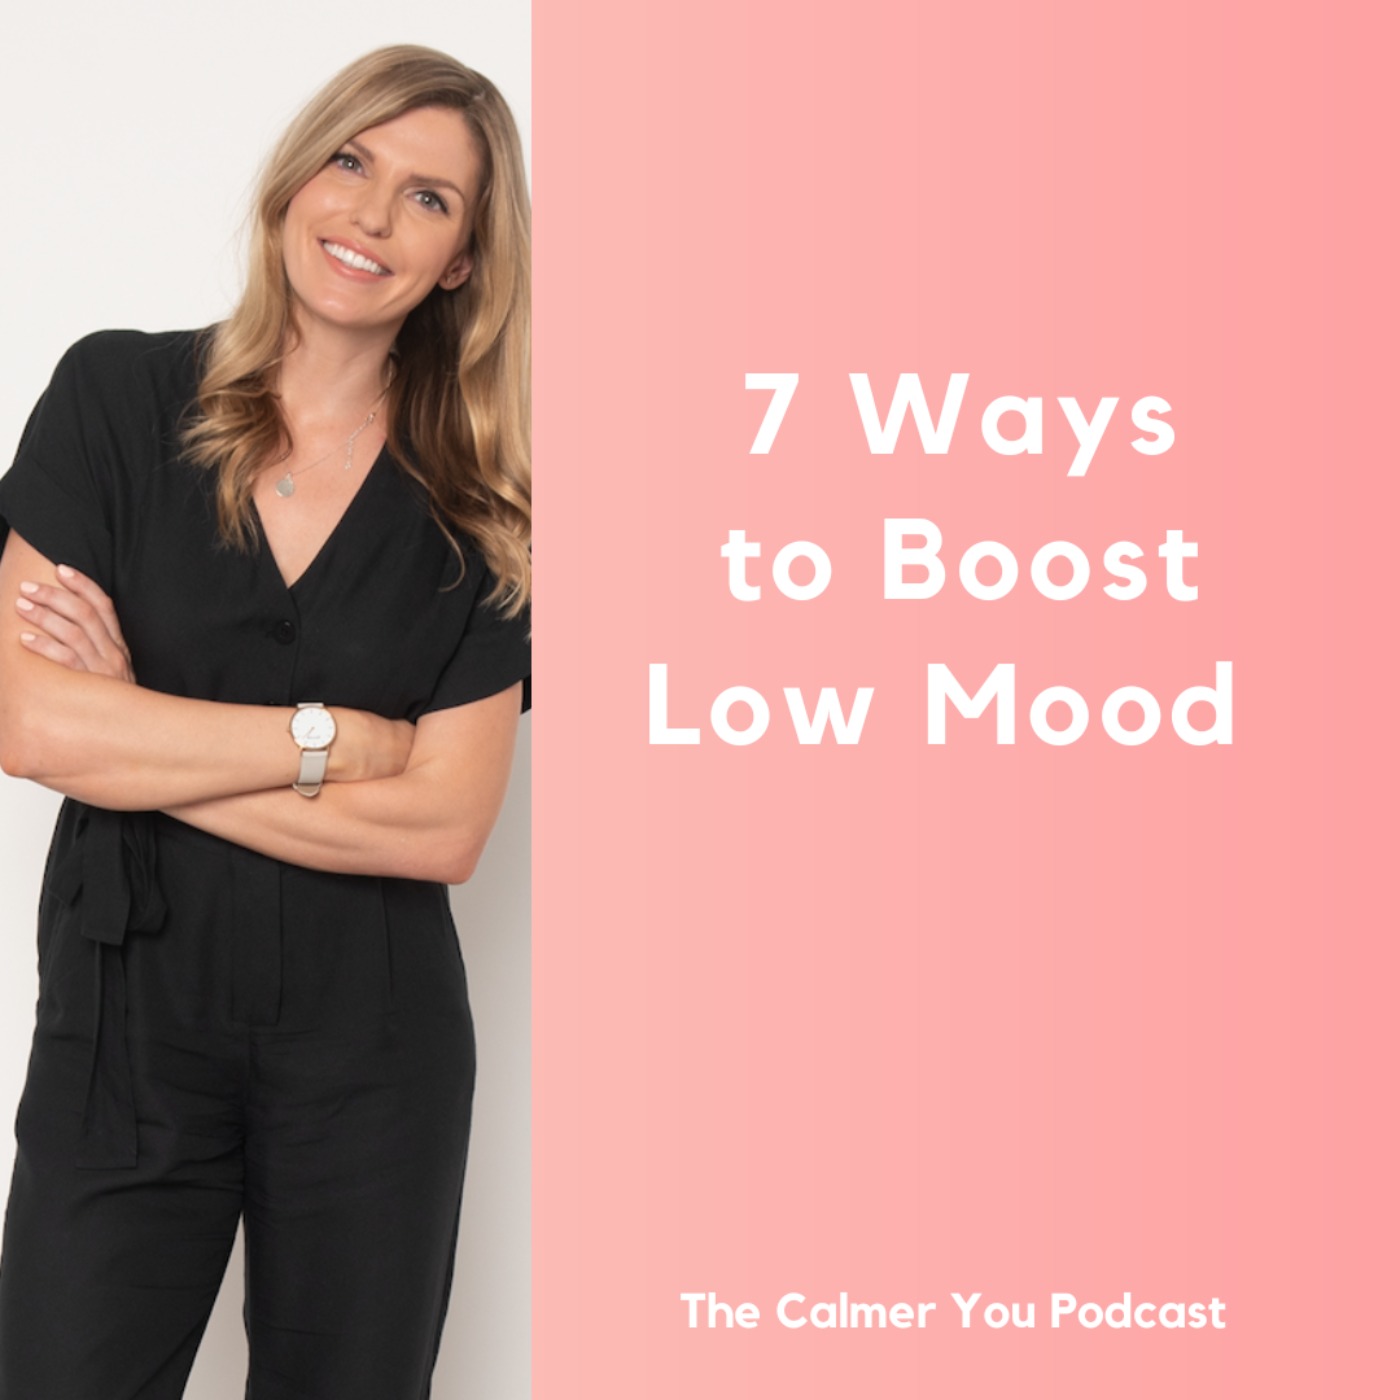 Ep 199. 7 Ways to Boost Low Mood